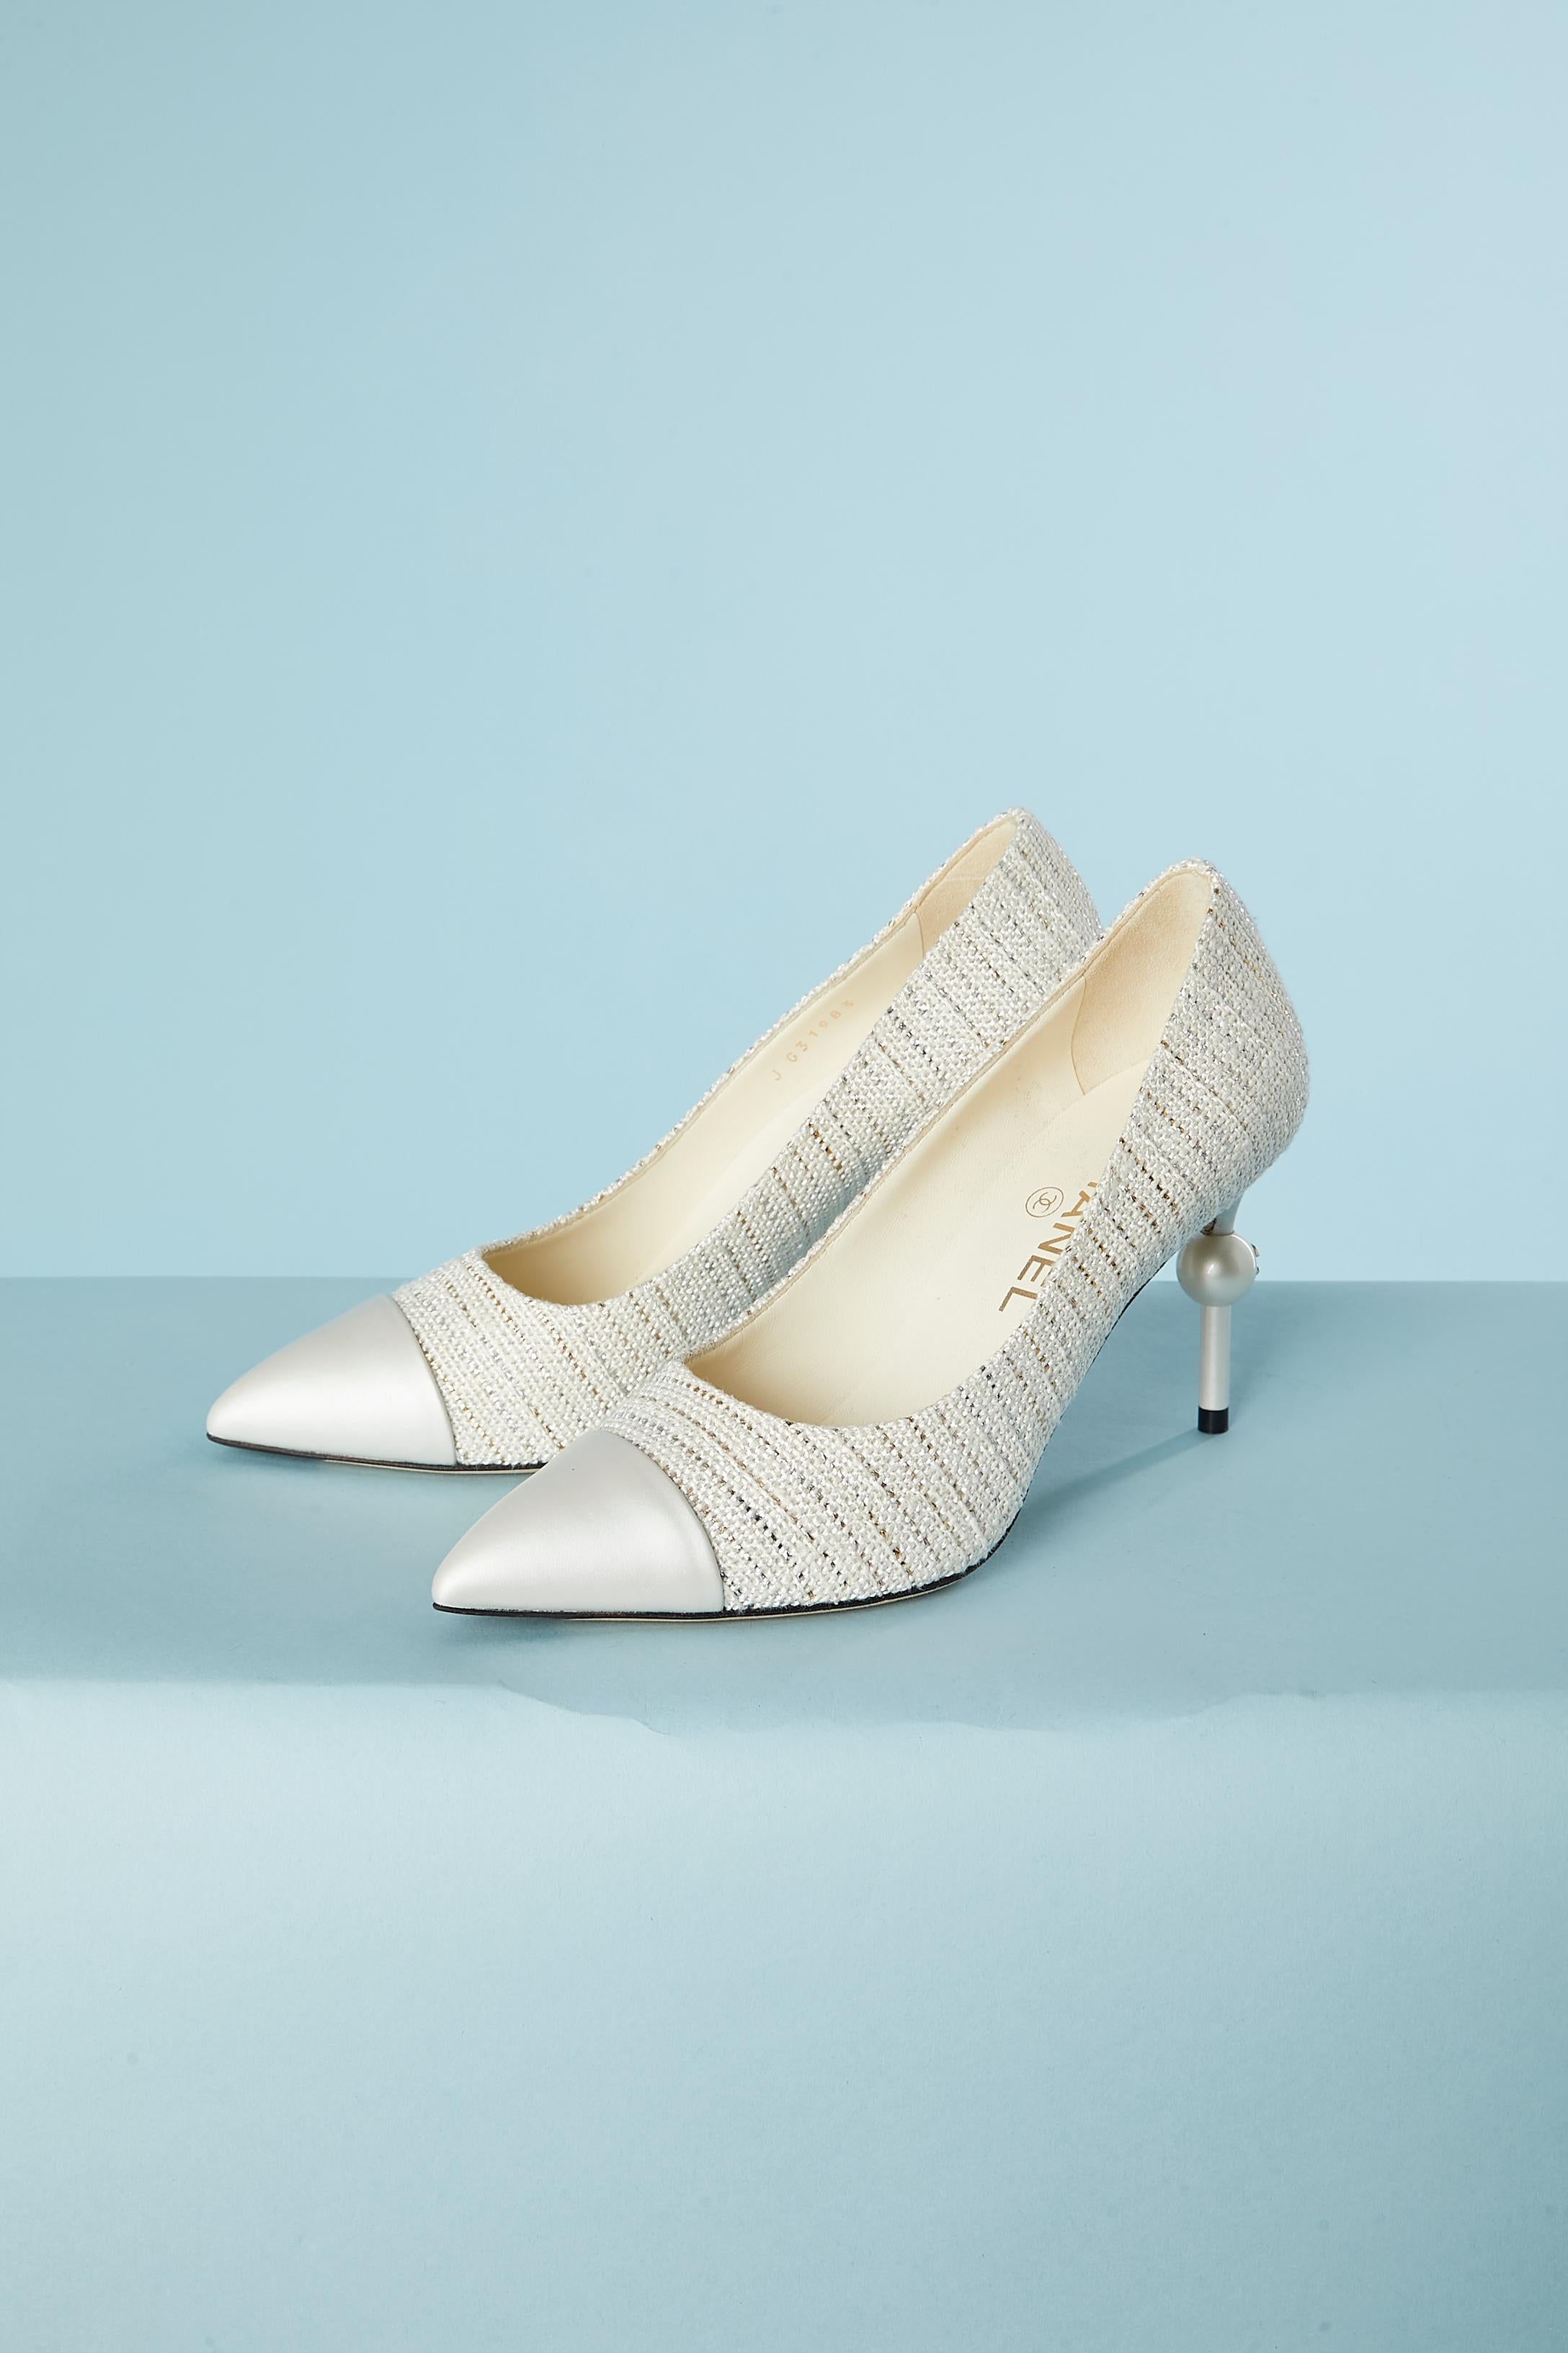 Off-white lurex tweed and leather pump with branded 